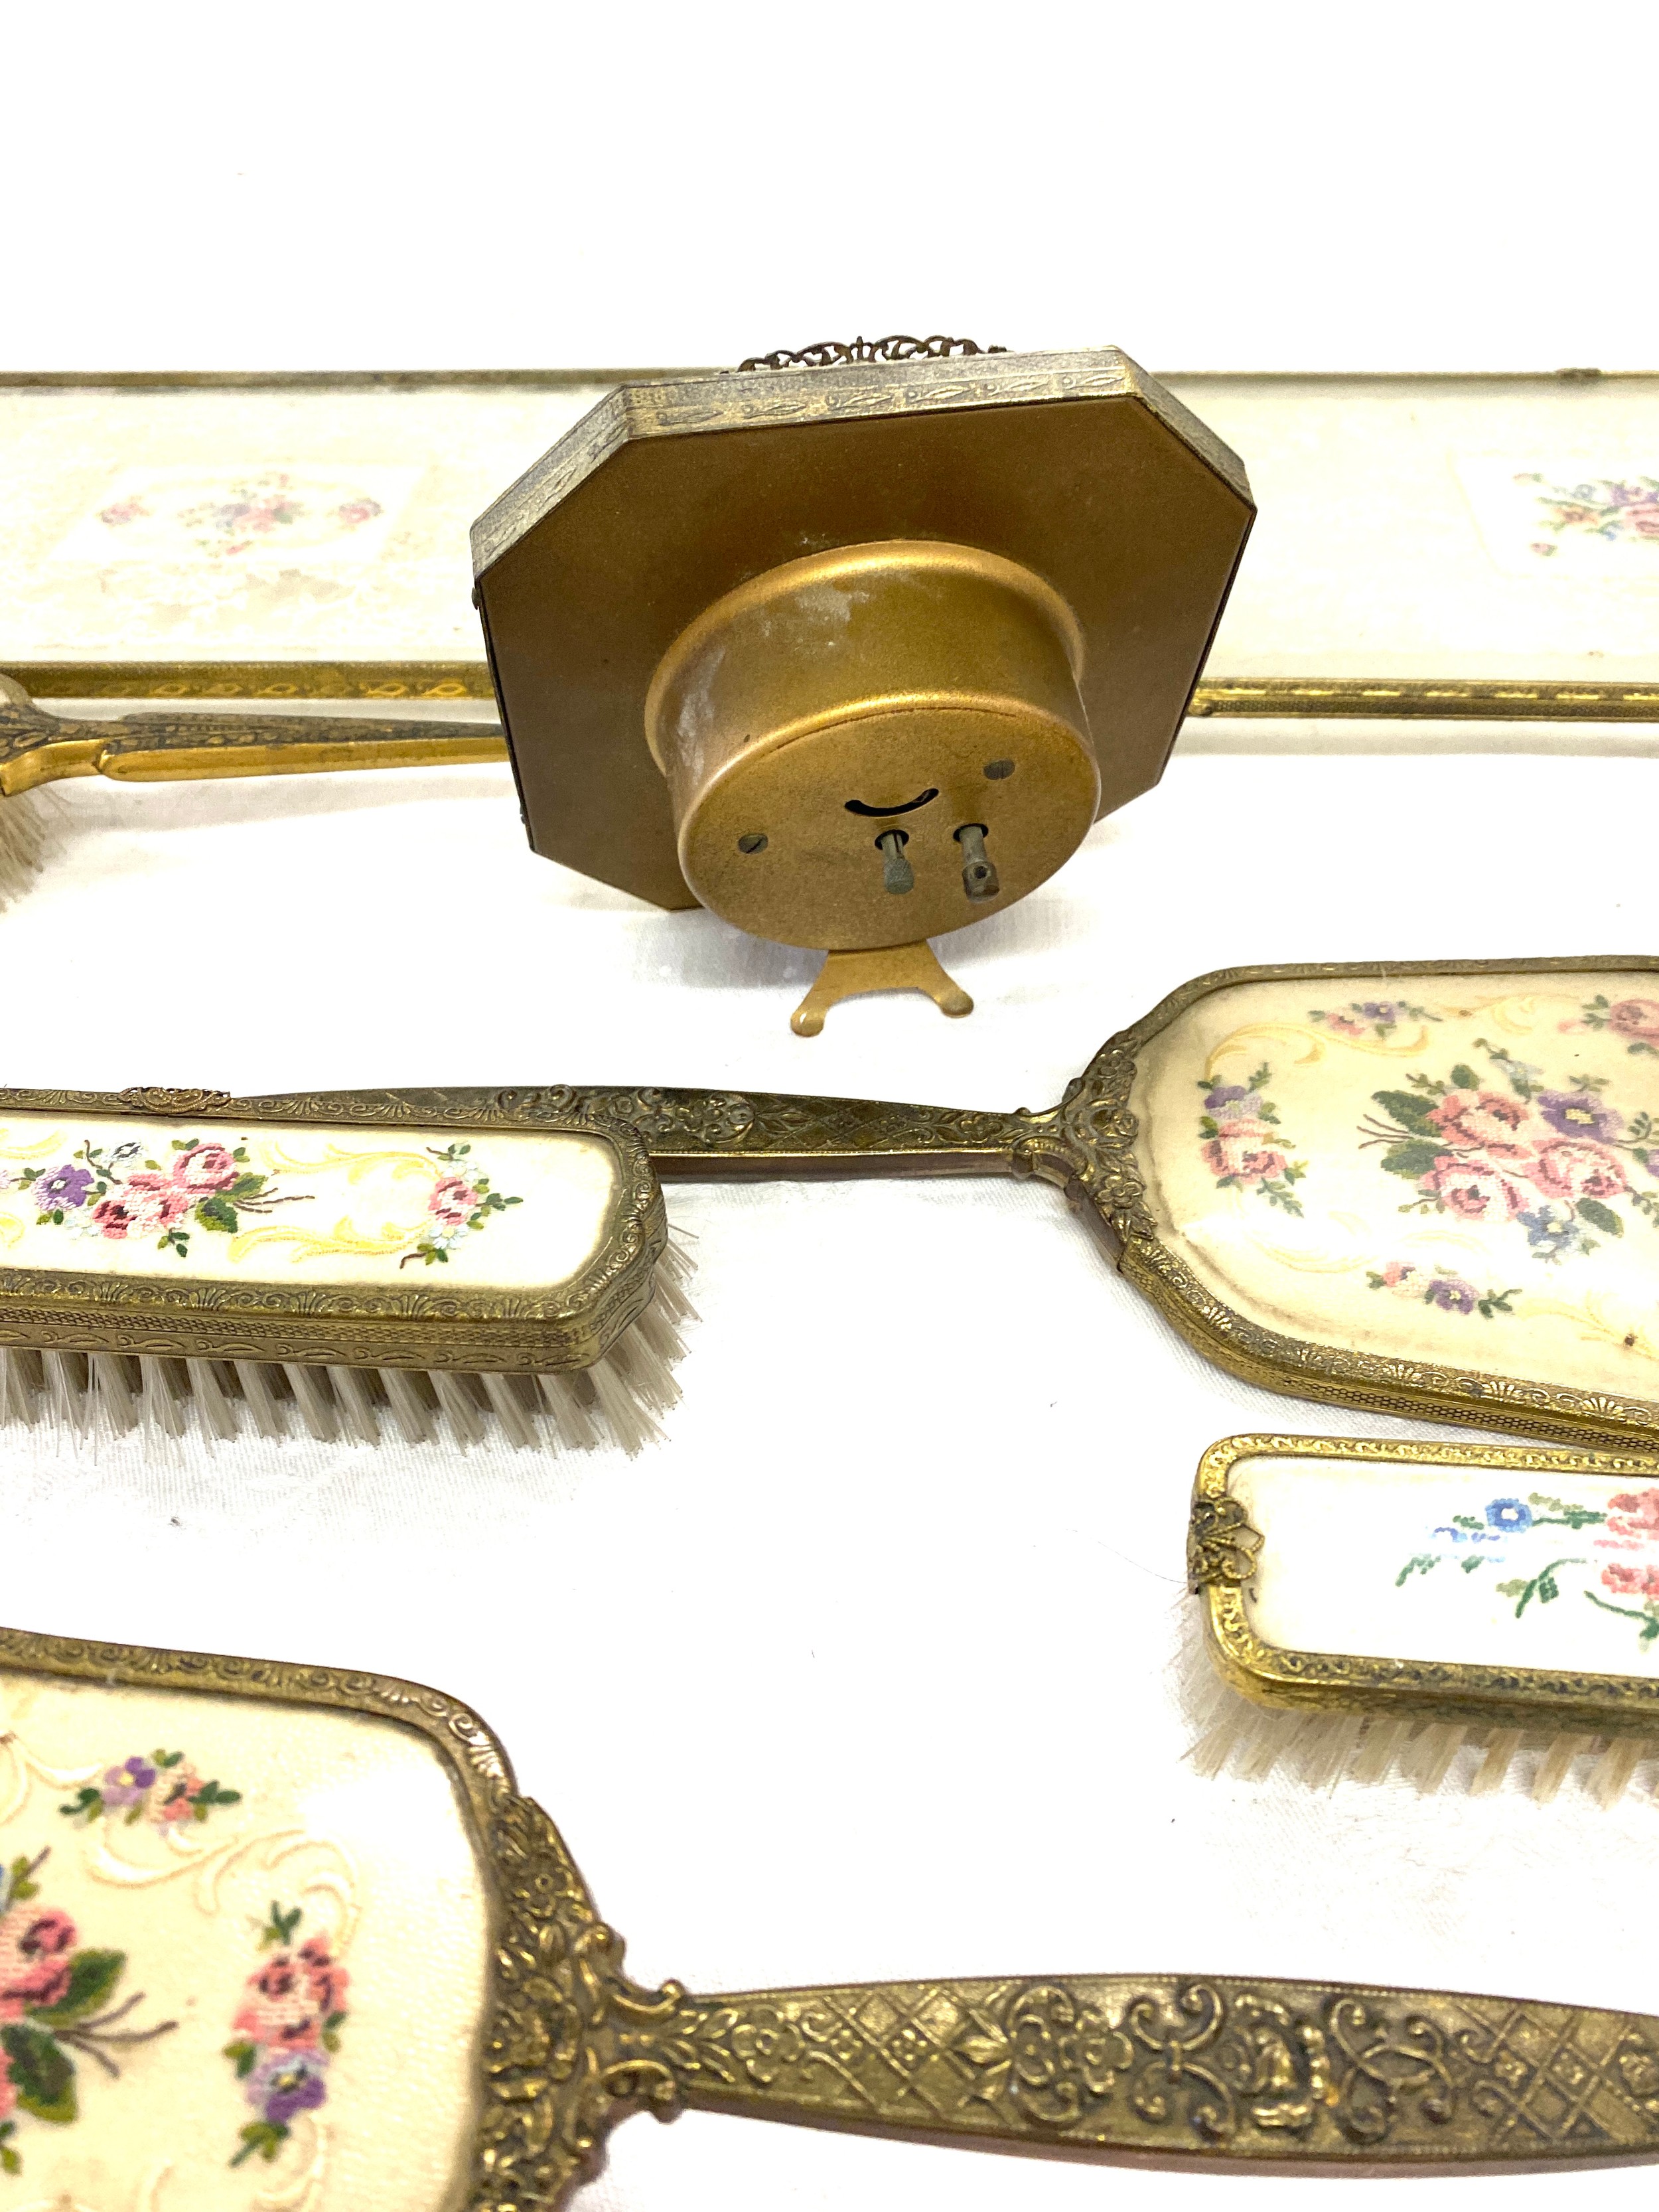 Vintage dressing table set with clock, brushes, tray etc - Image 5 of 5